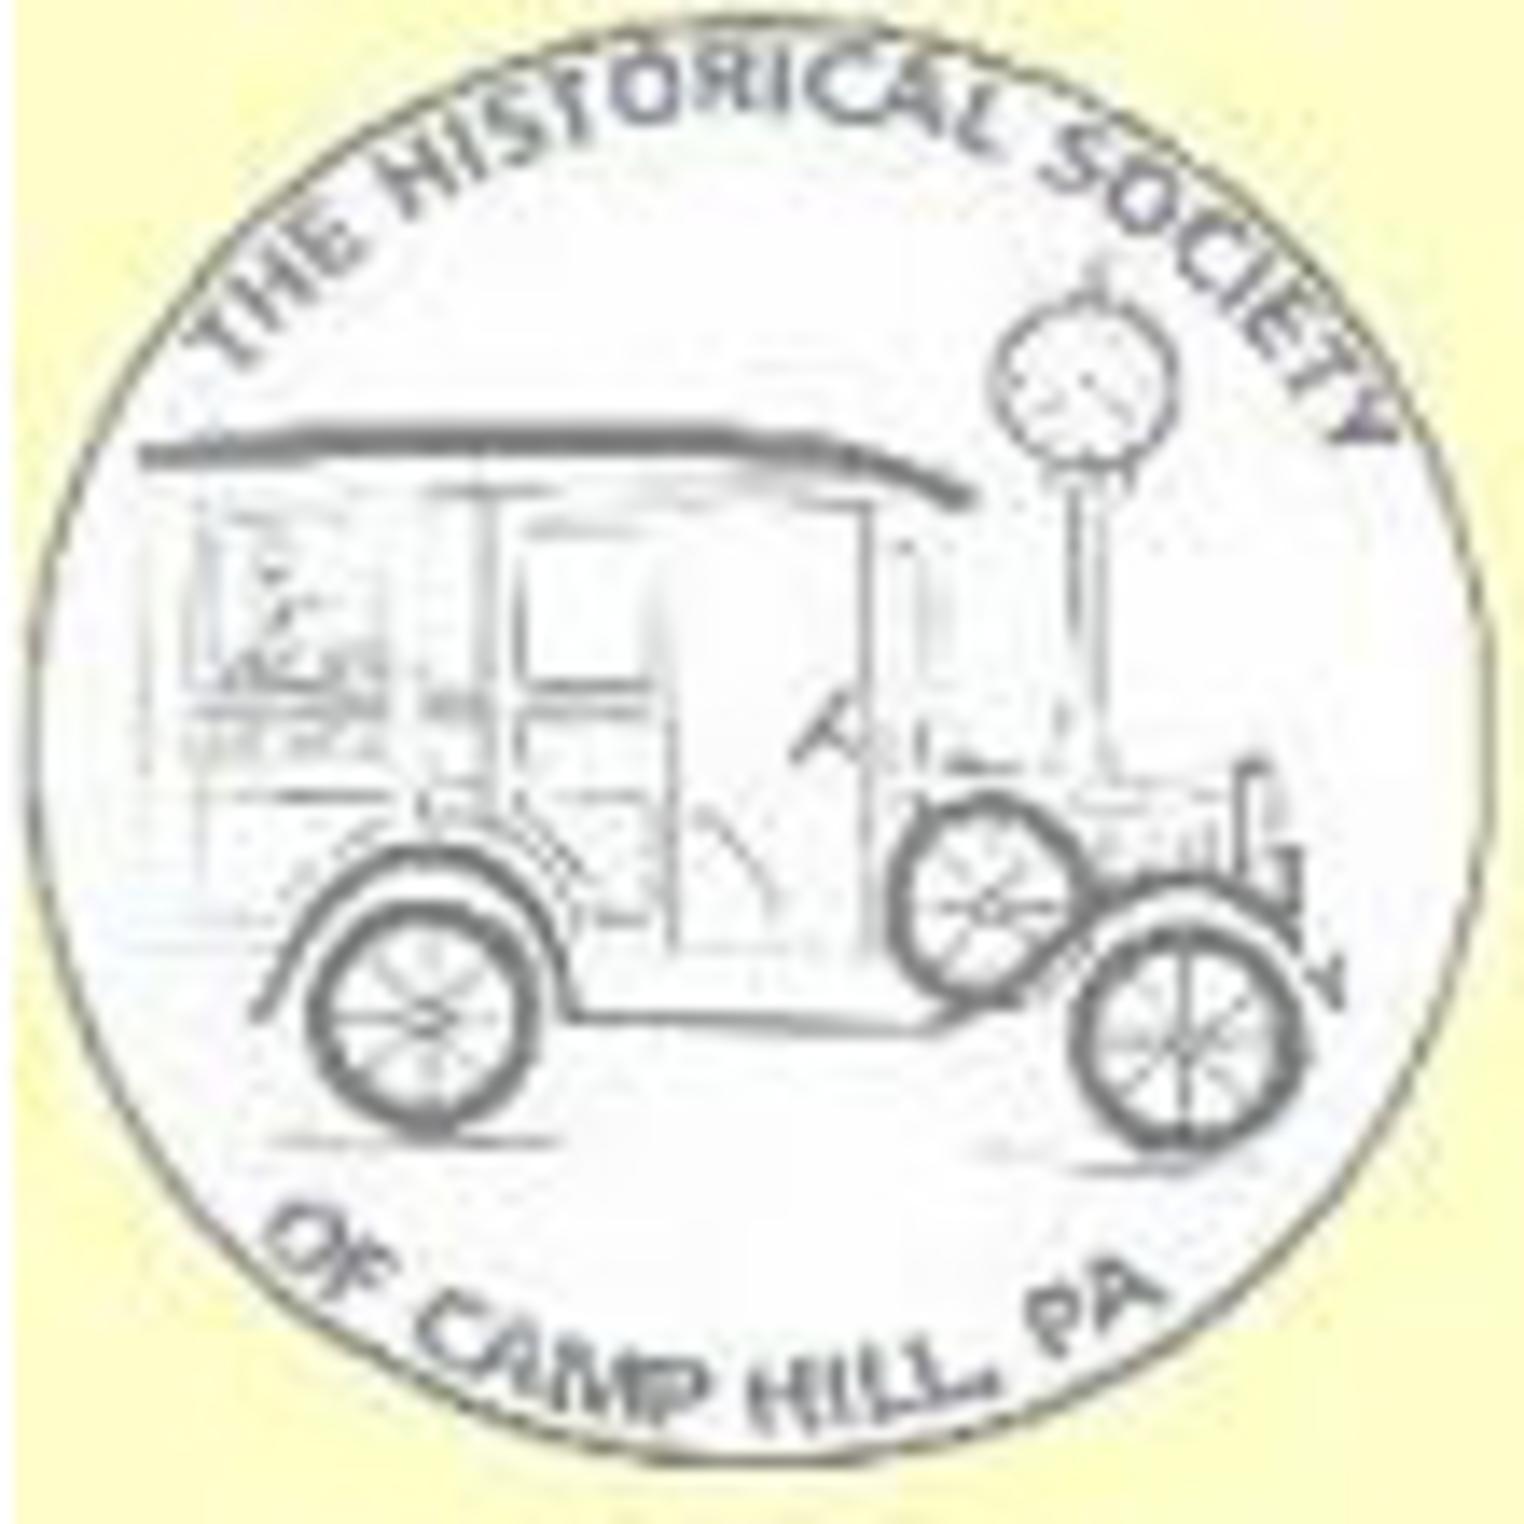 Historical Society of Camp Hill